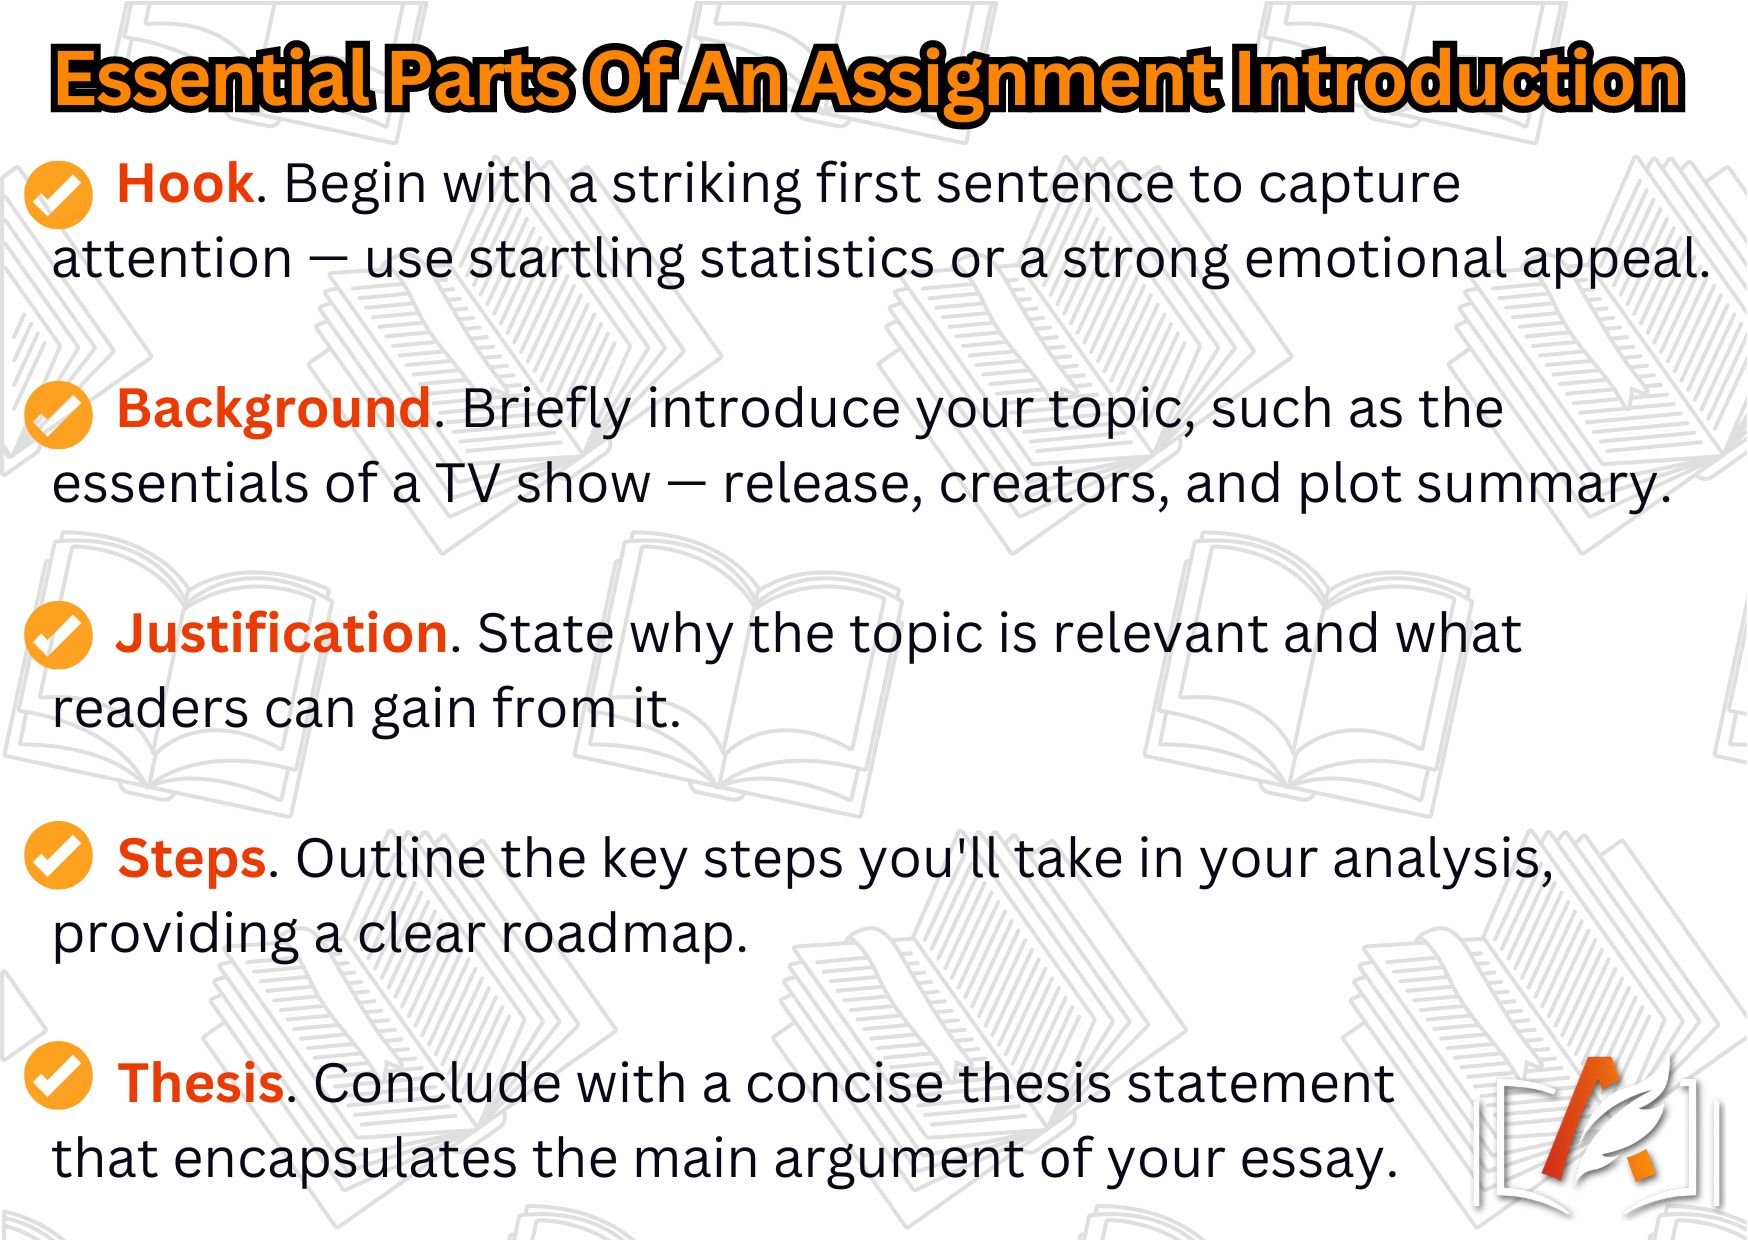 essential parts of an assignment introduction